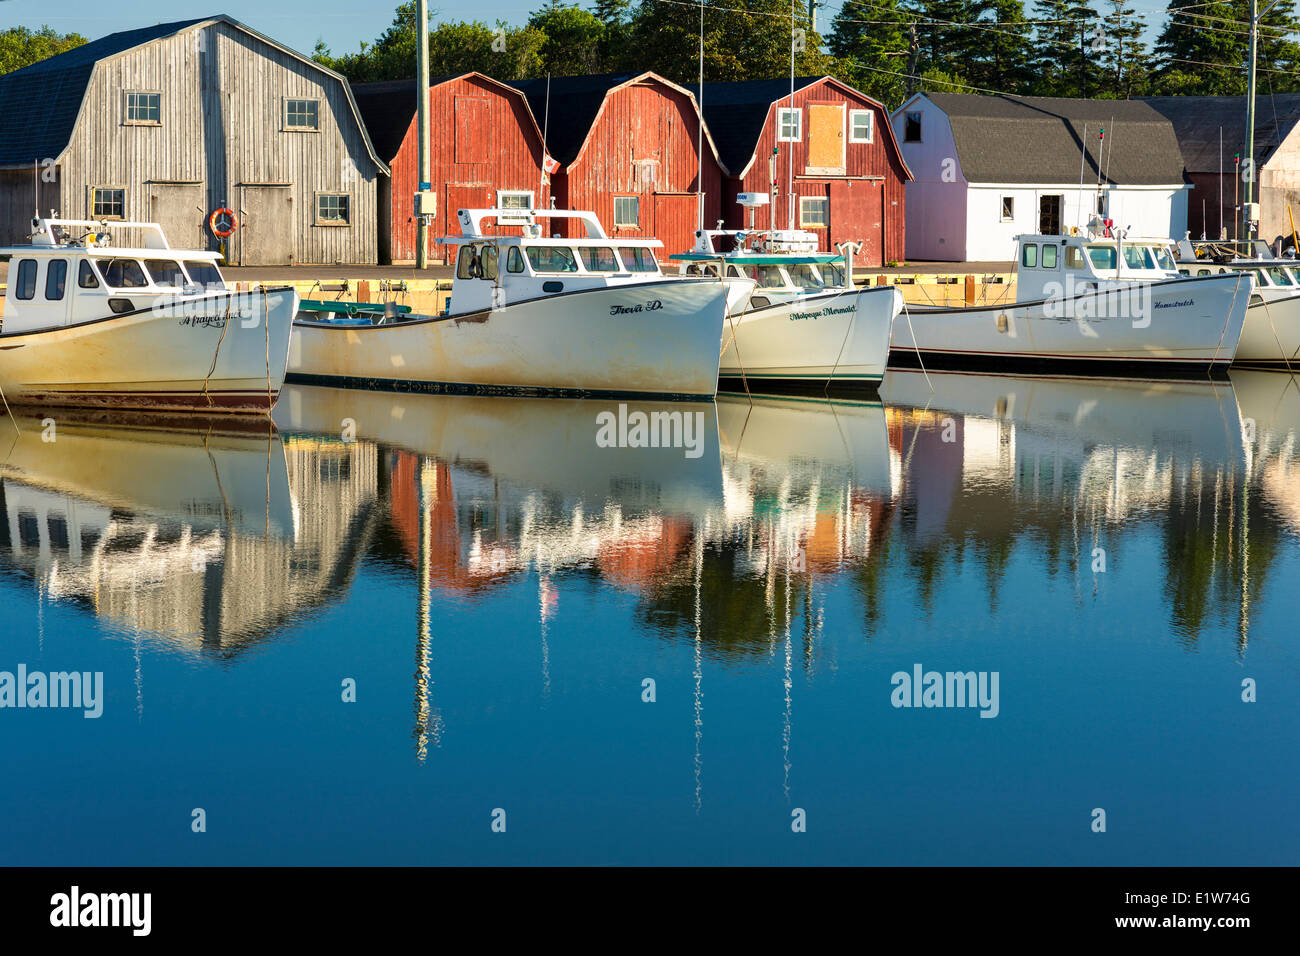 Fishing boats docked at Malpeque Harbour, Prince Edward Island, Canada Stock Photo